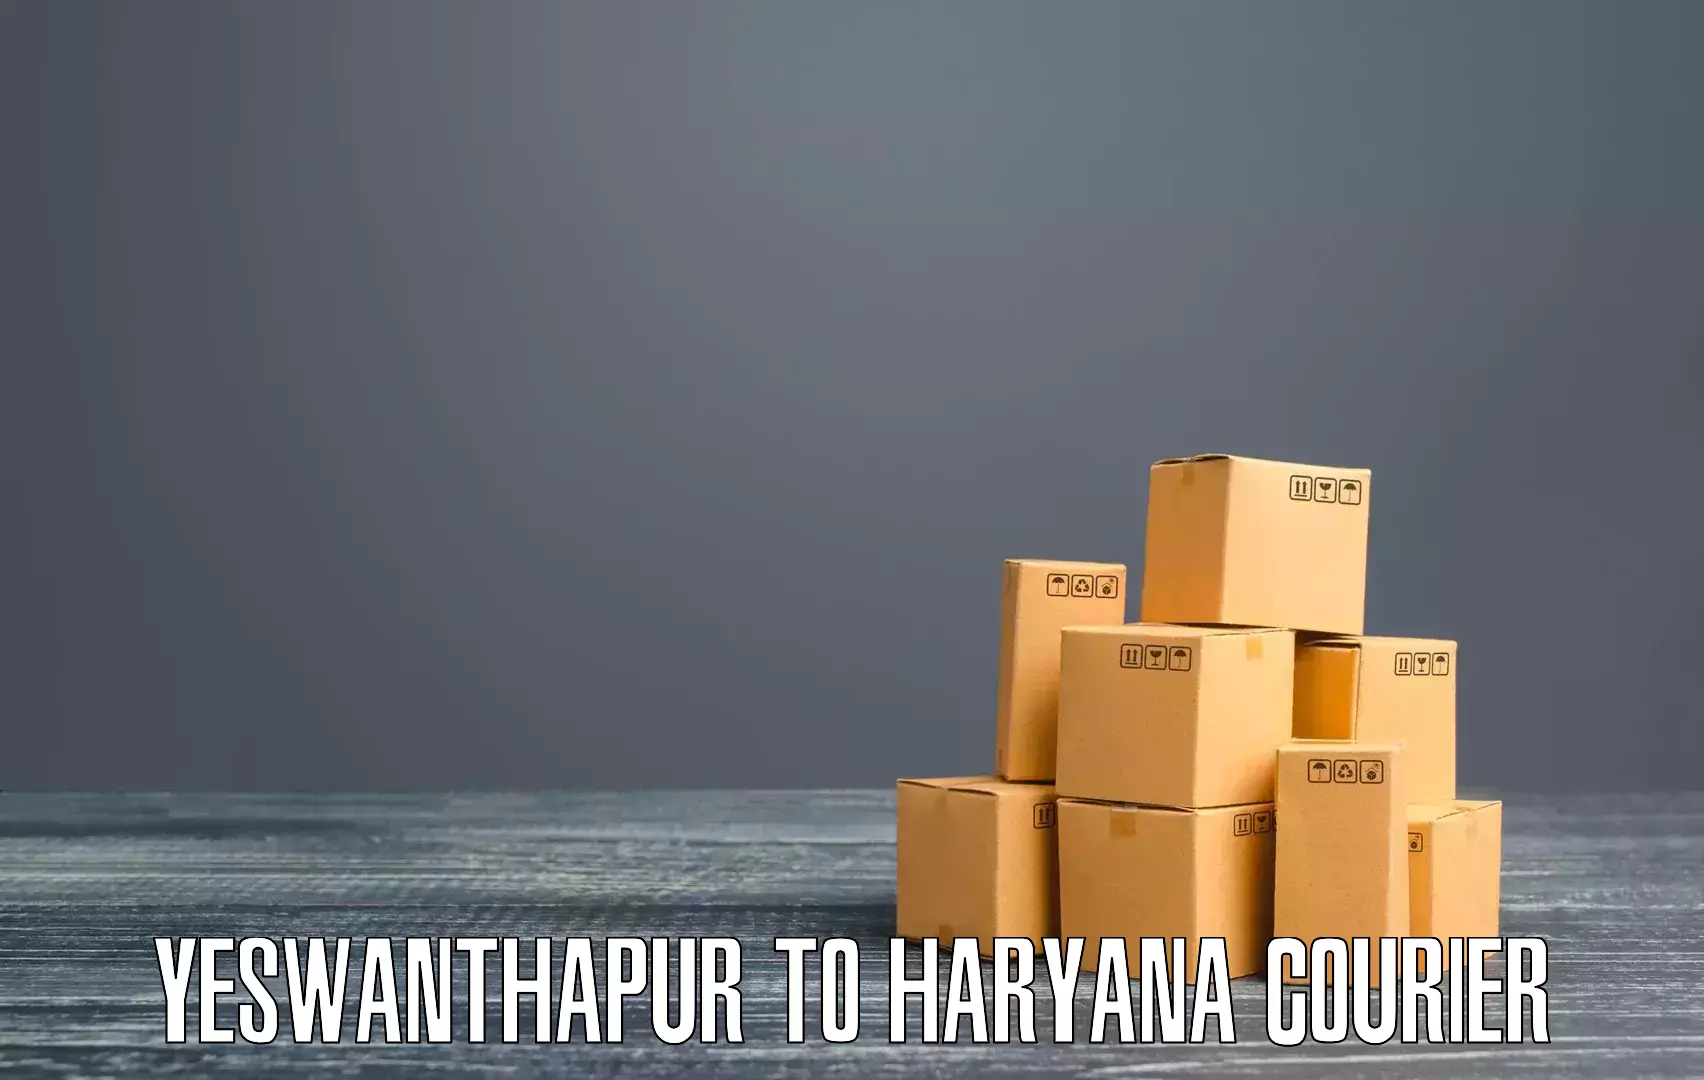 Doorstep delivery service Yeswanthapur to Panchkula